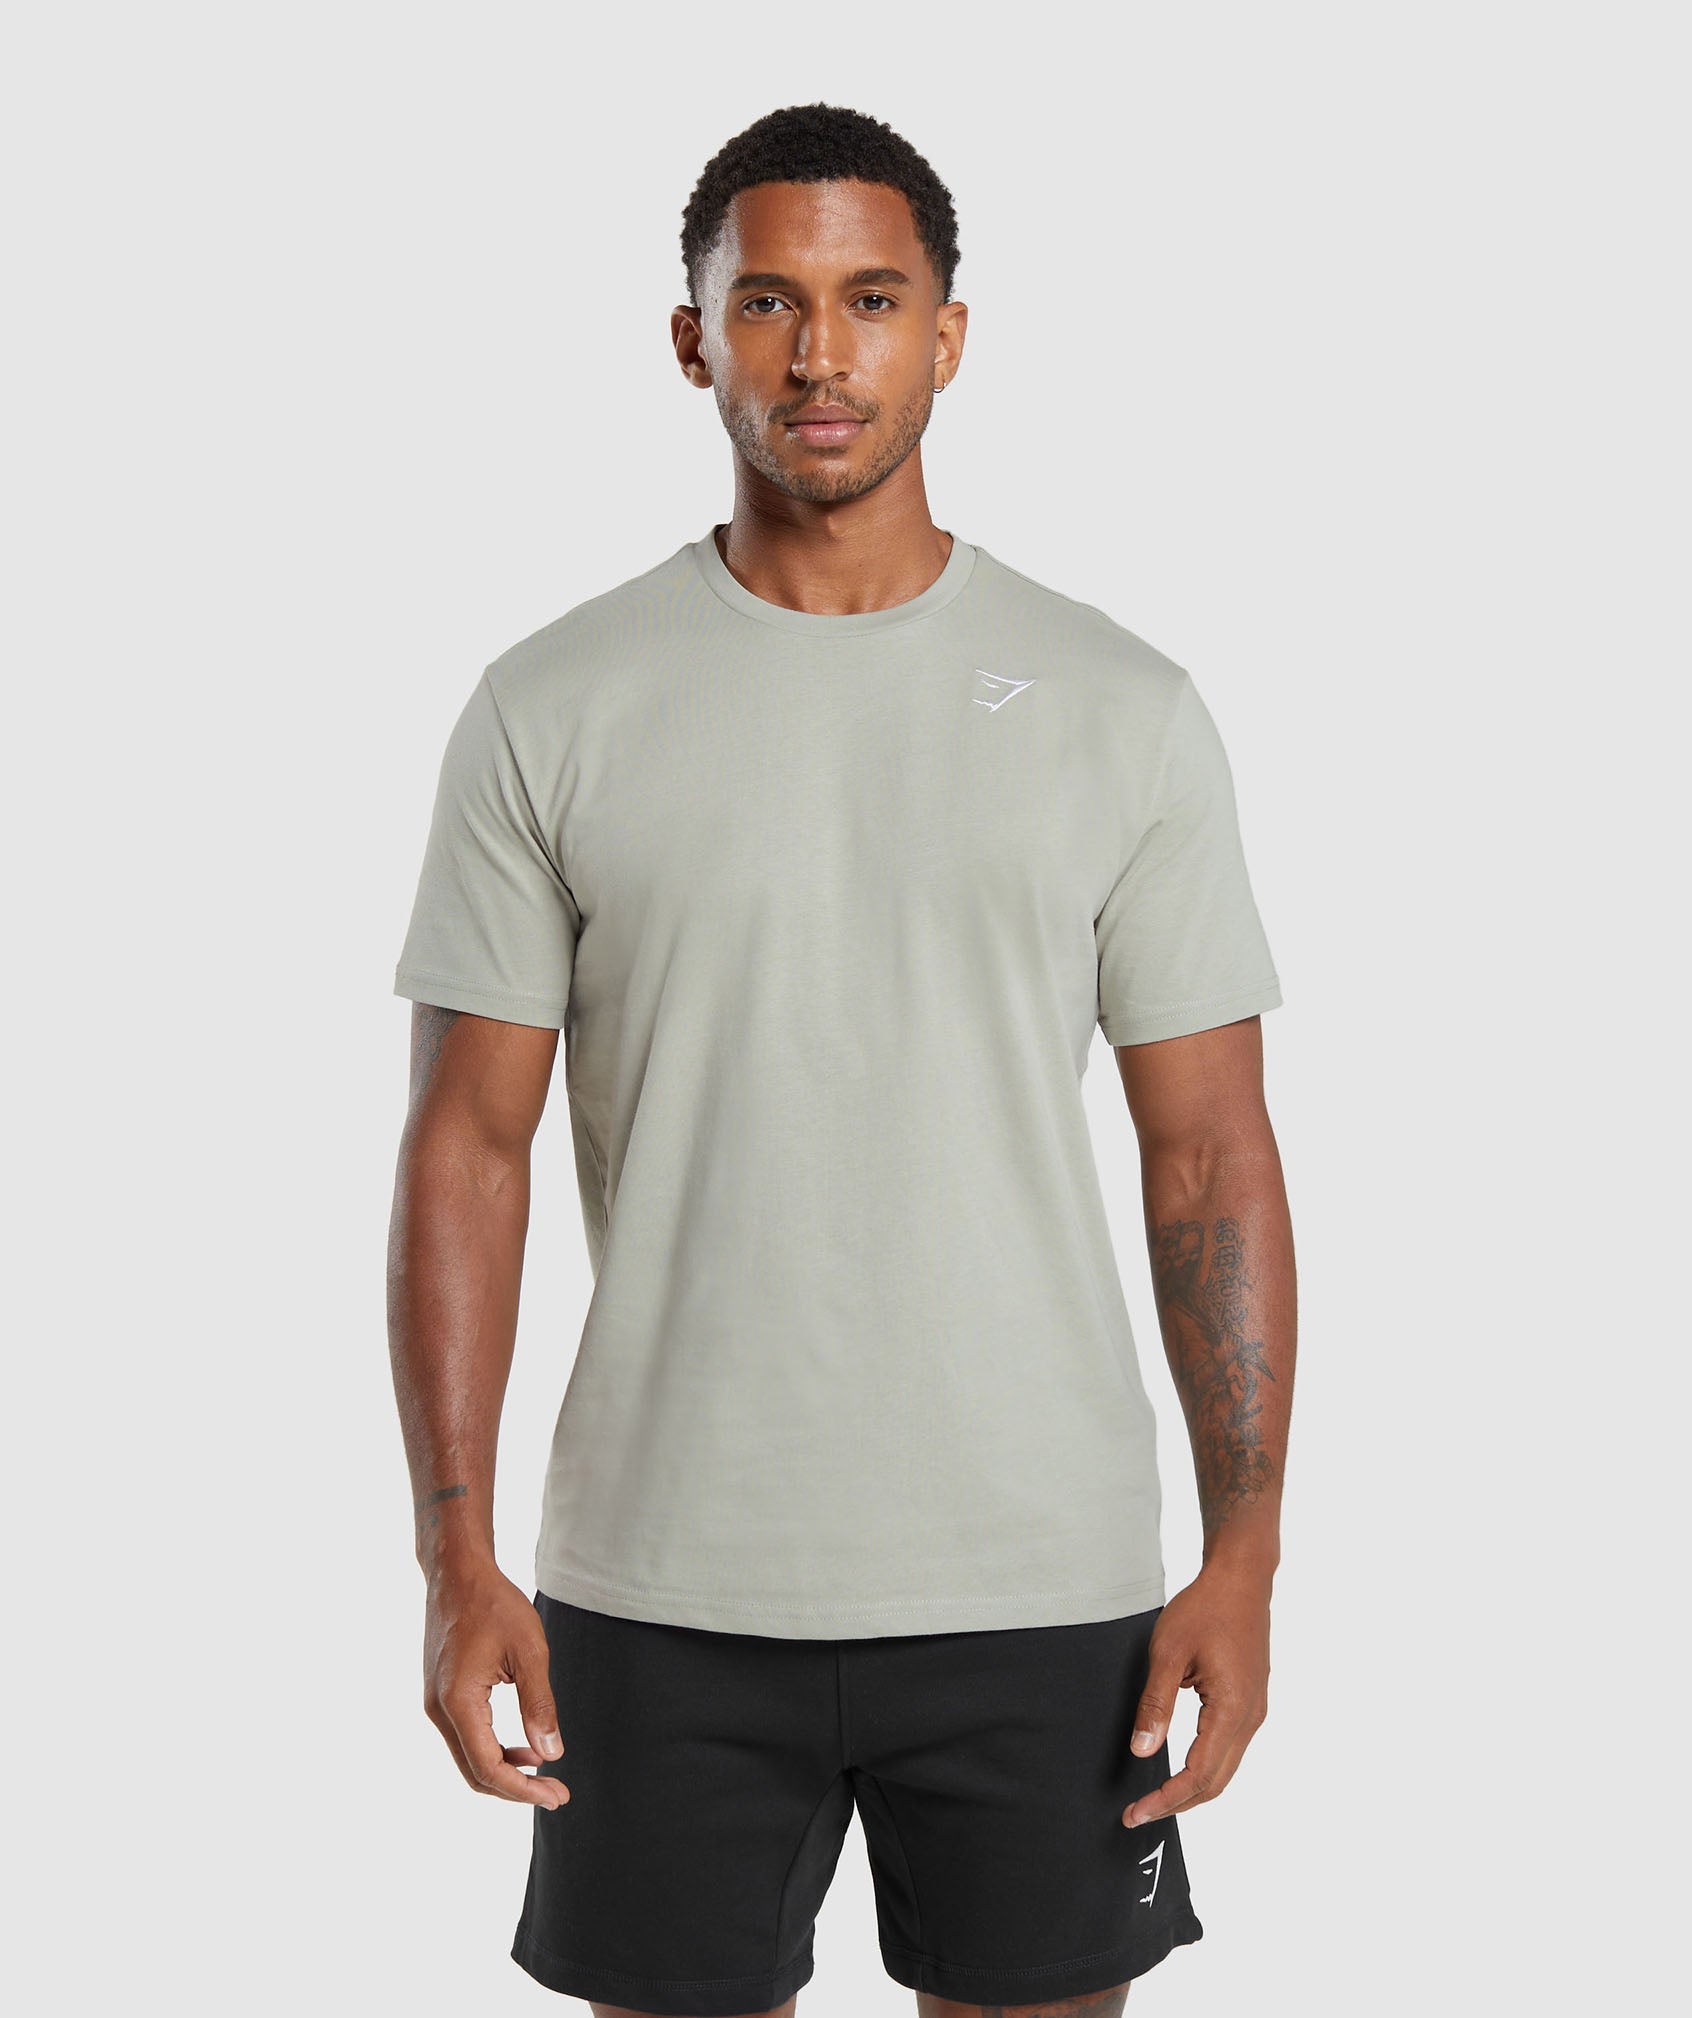 Crest T-Shirt in Stone Grey